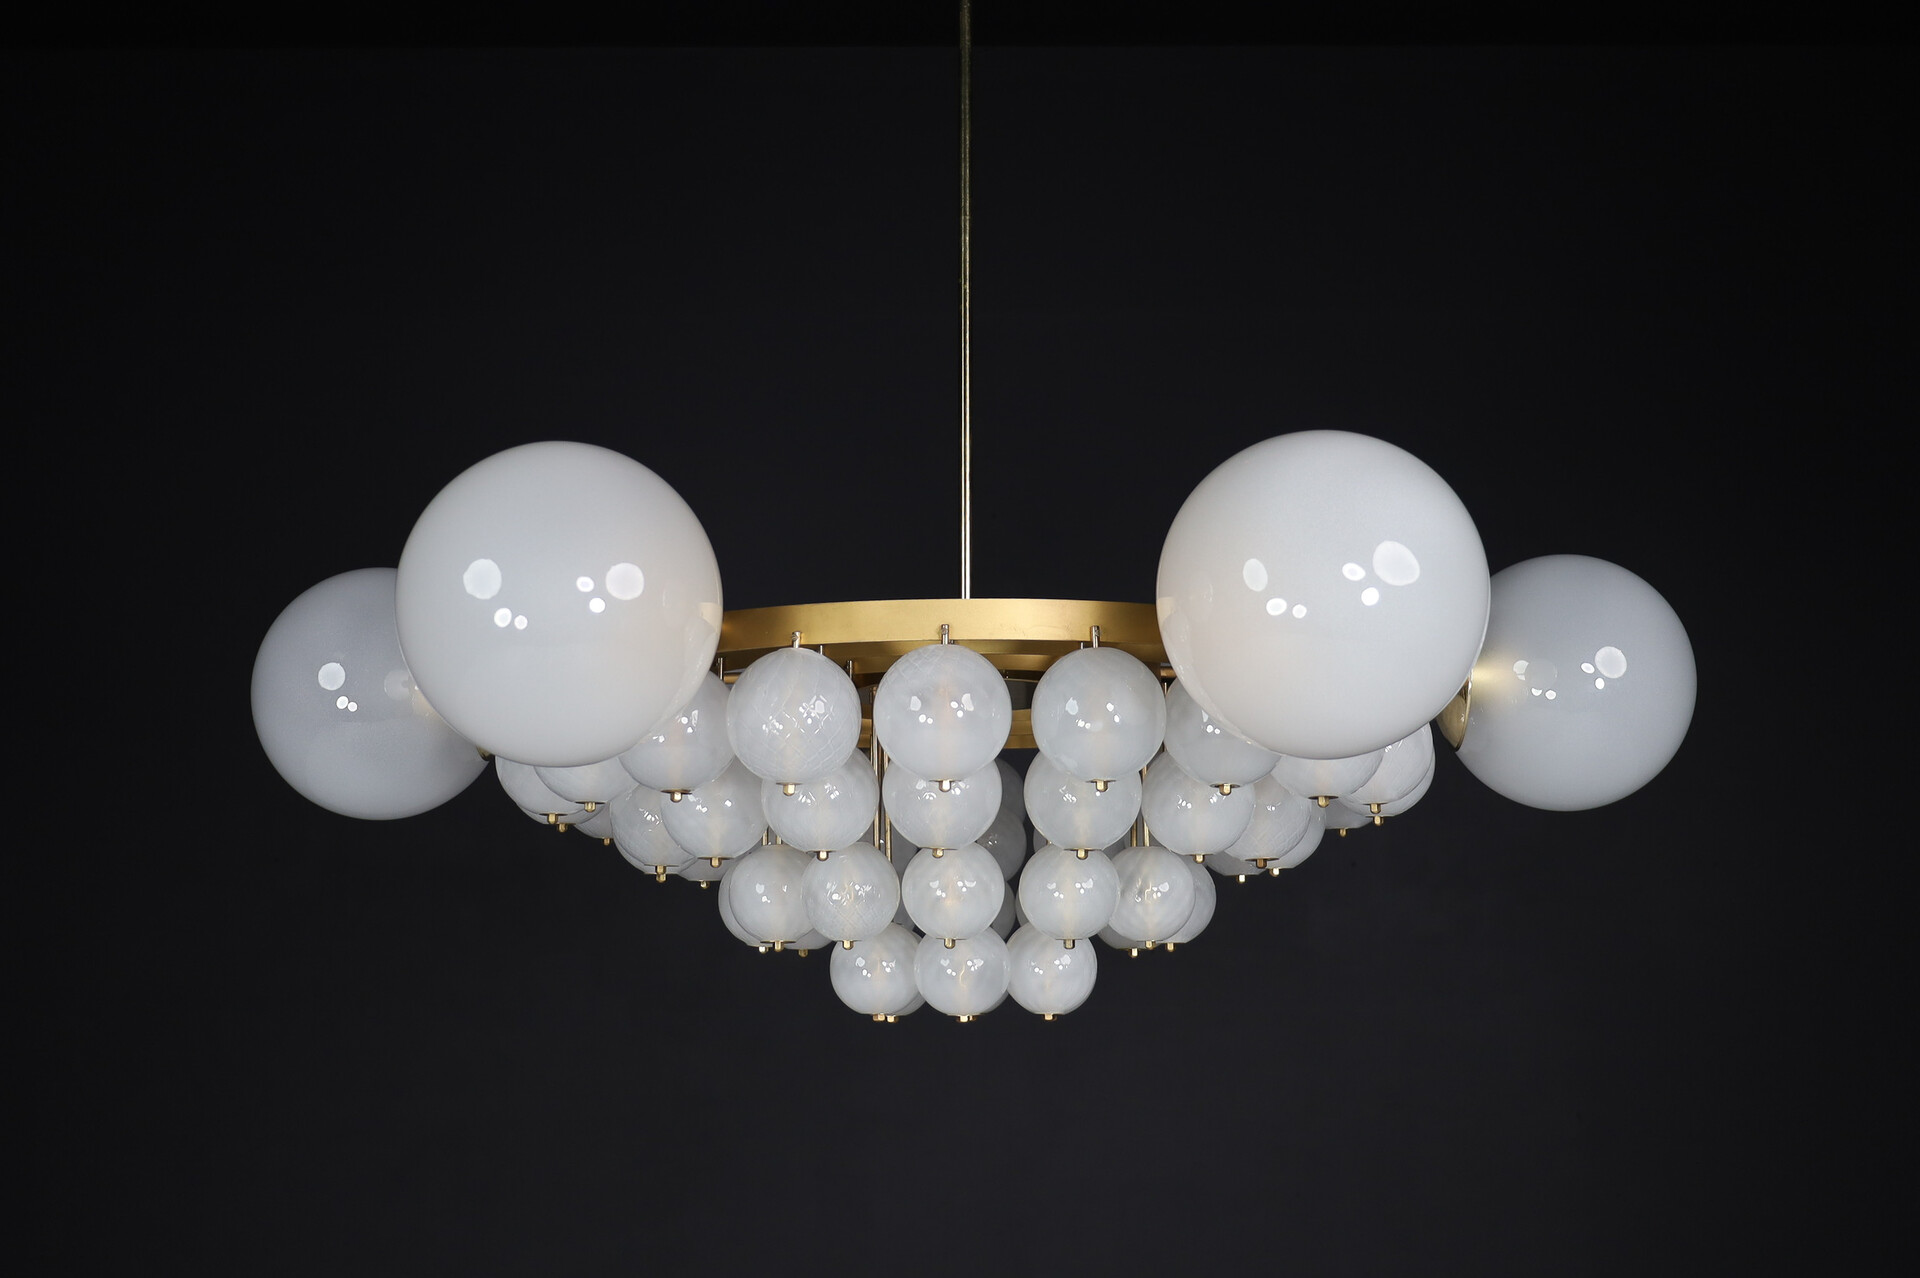 Mid century modern Grand Bohemian Chandelier with Brass Fixture & Hand-blowed Frosted Glass Globes 1960s Mid-20th century